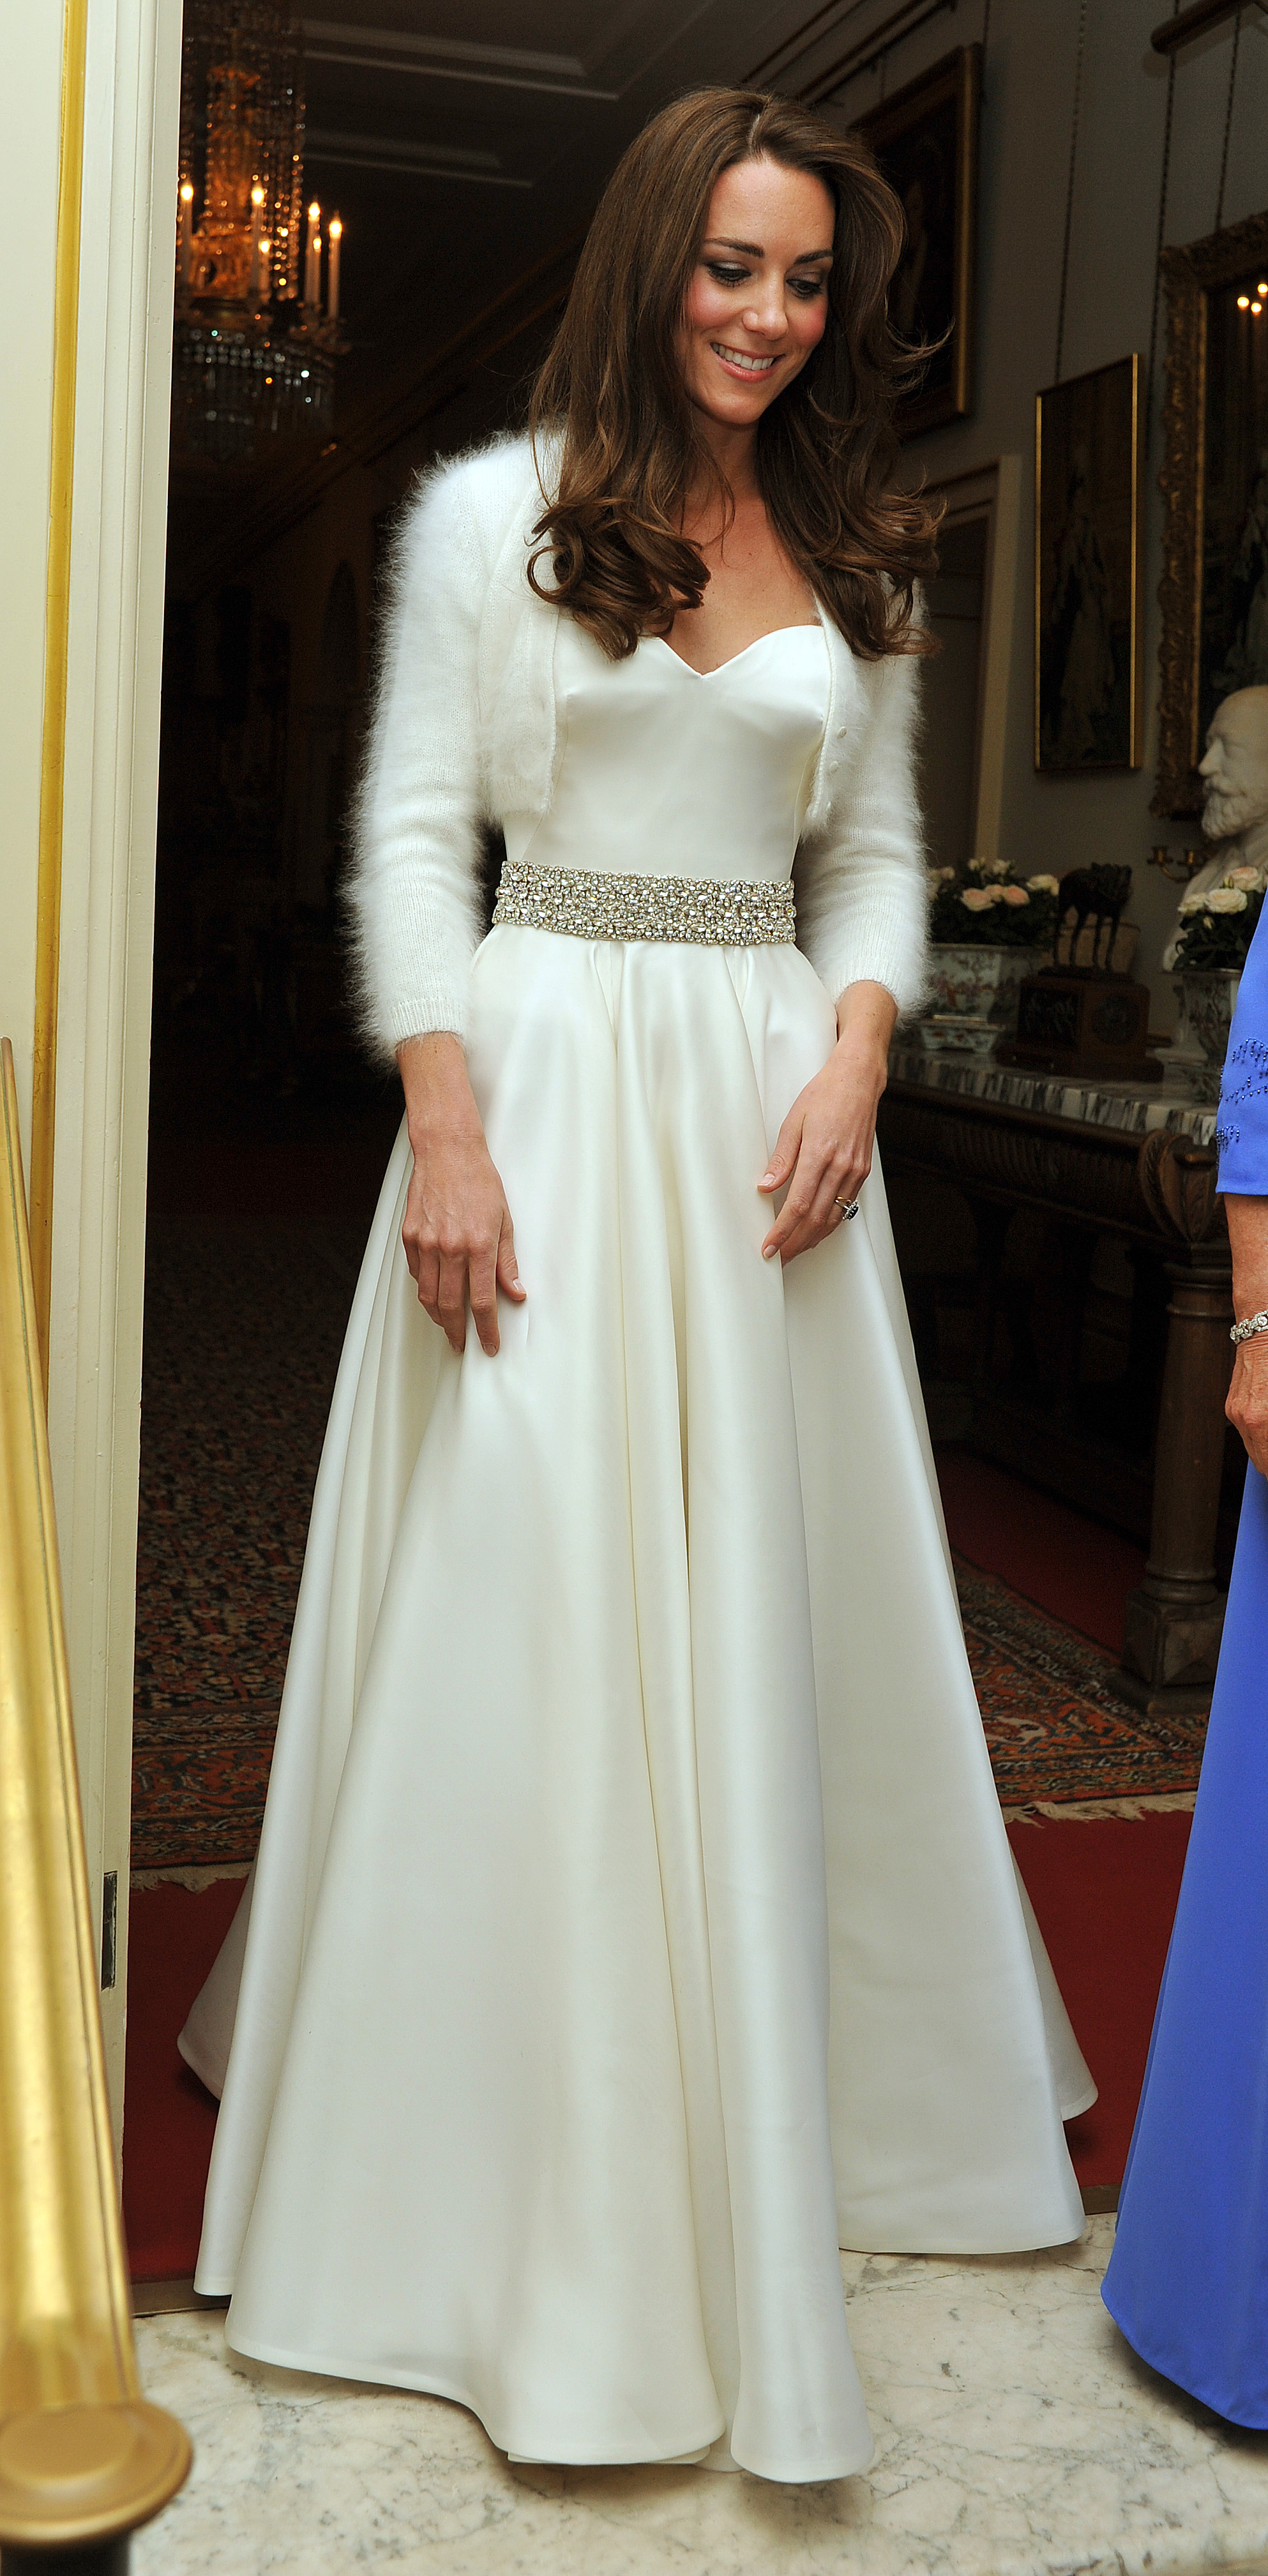 Kate Middleton wearing a long silky white a-line dress with a sparkly belt and a fluffy white cardigan 